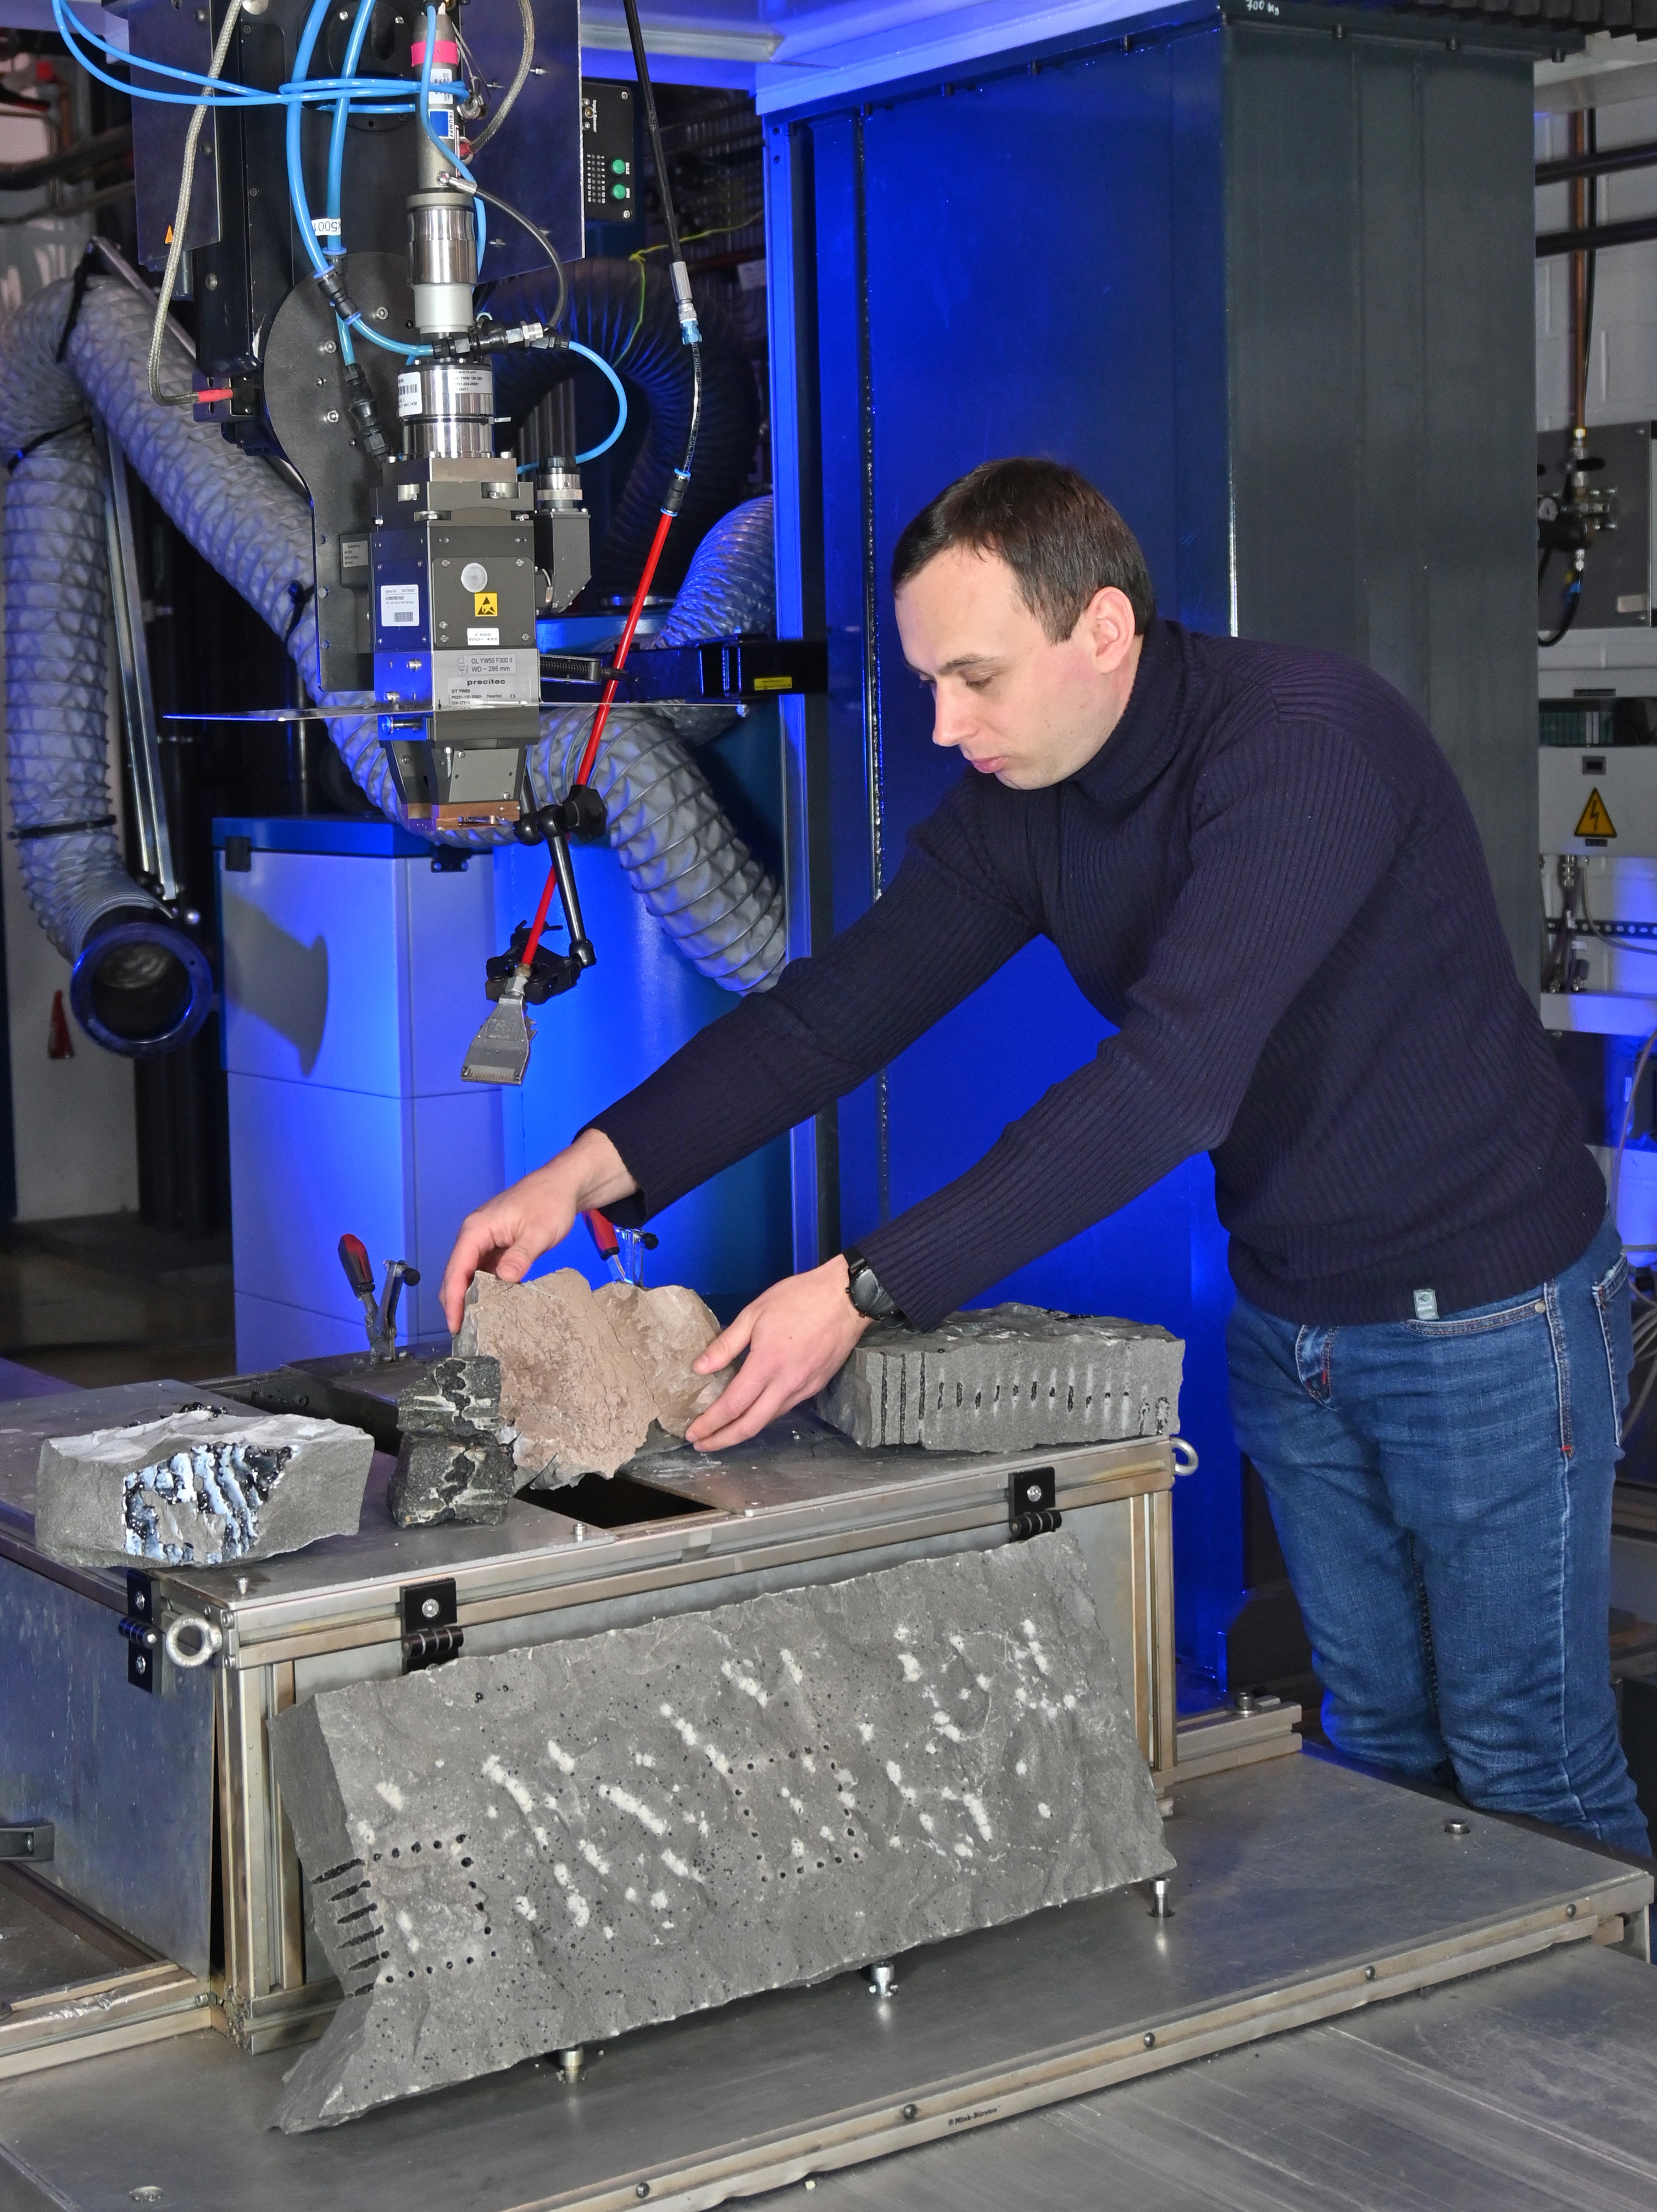 The Fraunhofer Future Foundation fully finances research stays for Ukrainian experts at Fraunhofer institutes in Germany for up to six months. Oleksandr Proskurin is the first visiting scientist to take part in the initiative.